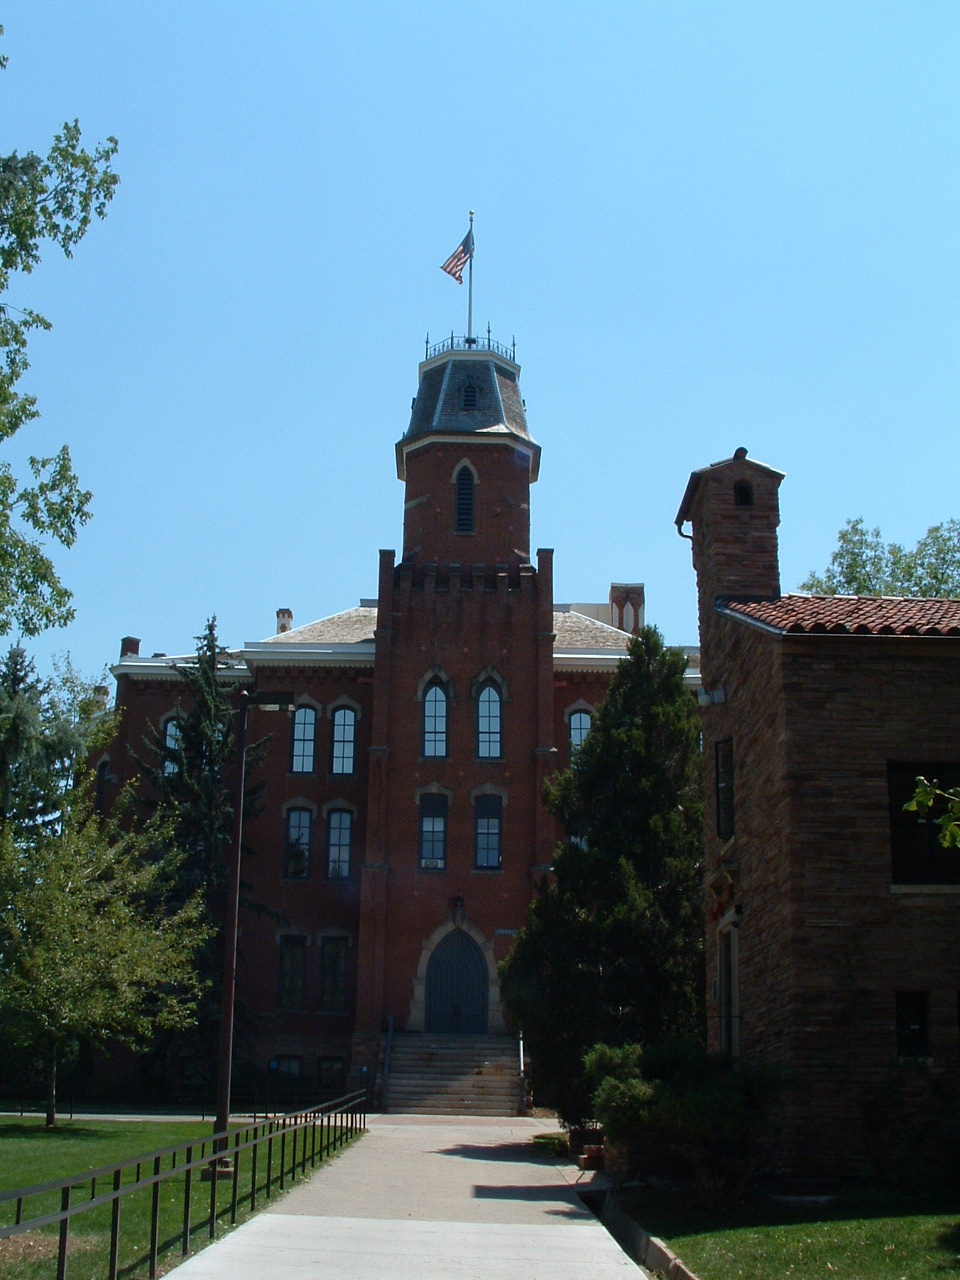 a very tall brick building with a tower on top